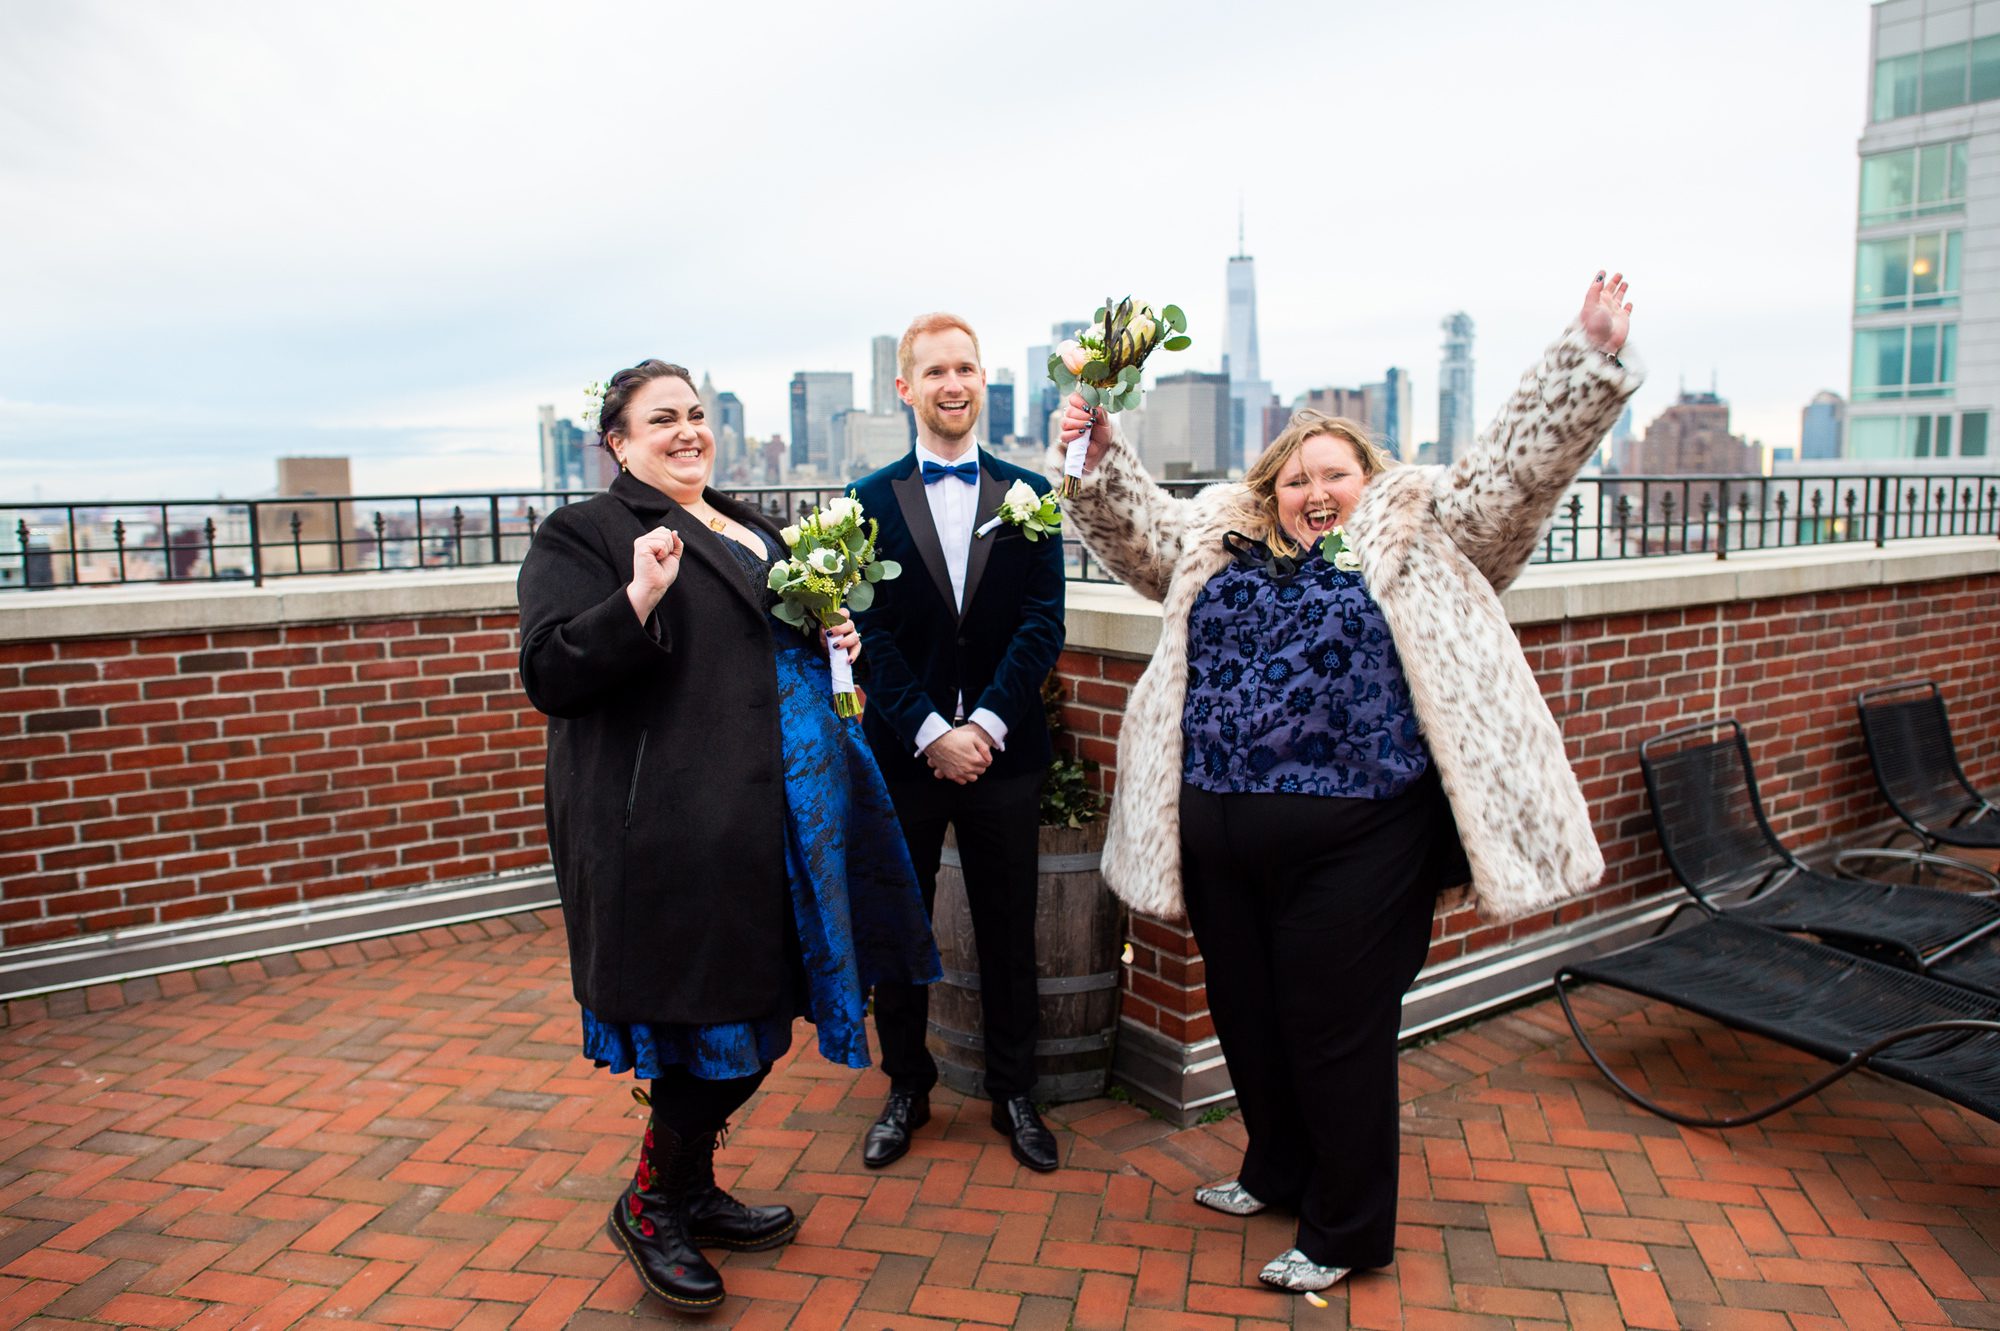 Winter Elopement on NYC Rooftop